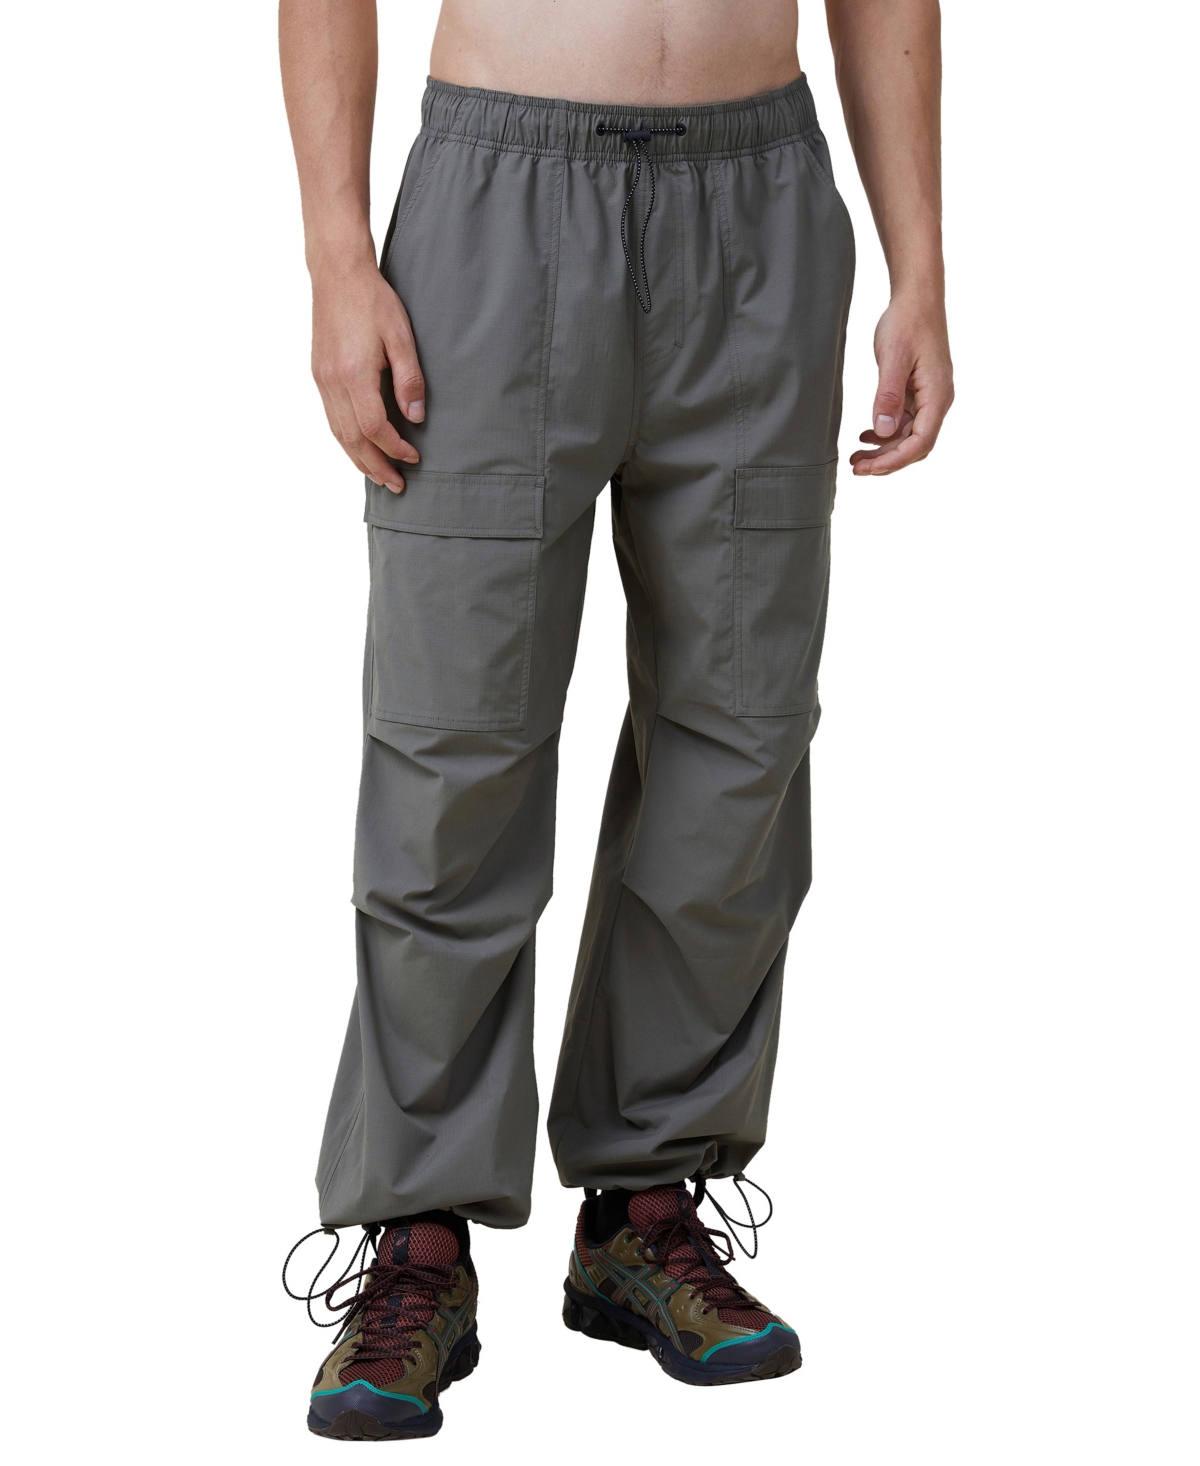 Cotton On Men's Parachute Utility Pants In Steel Green Utility Cargo